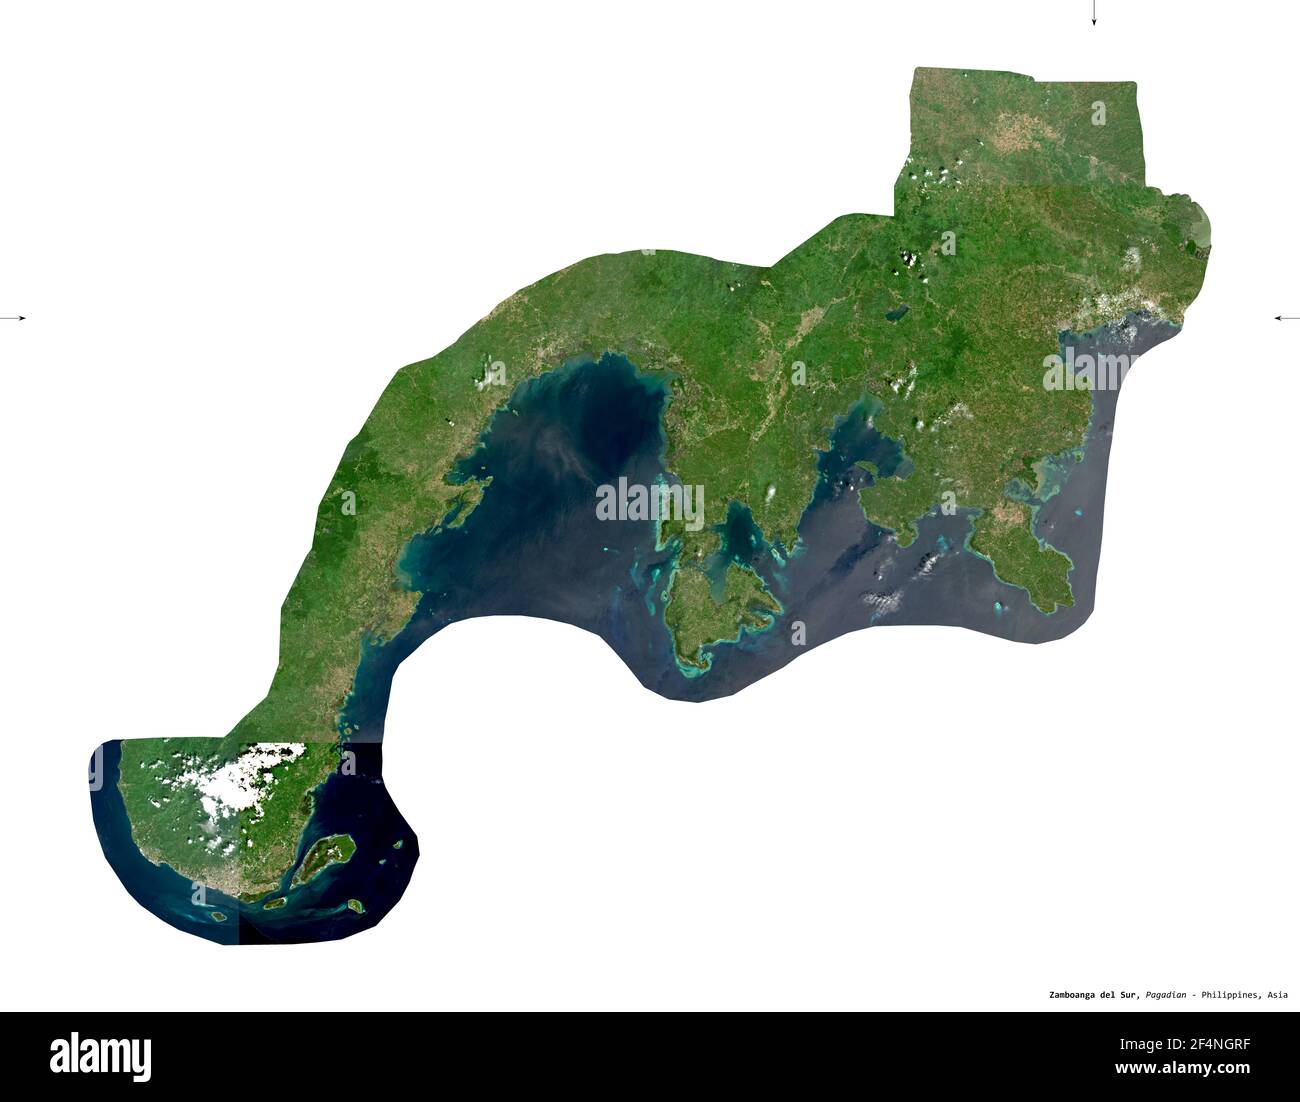 Zamboanga del Sur, province of Philippines. Sentinel-2 satellite imagery. Shape isolated on white solid. Description, location of the capital. Contain Stock Photo